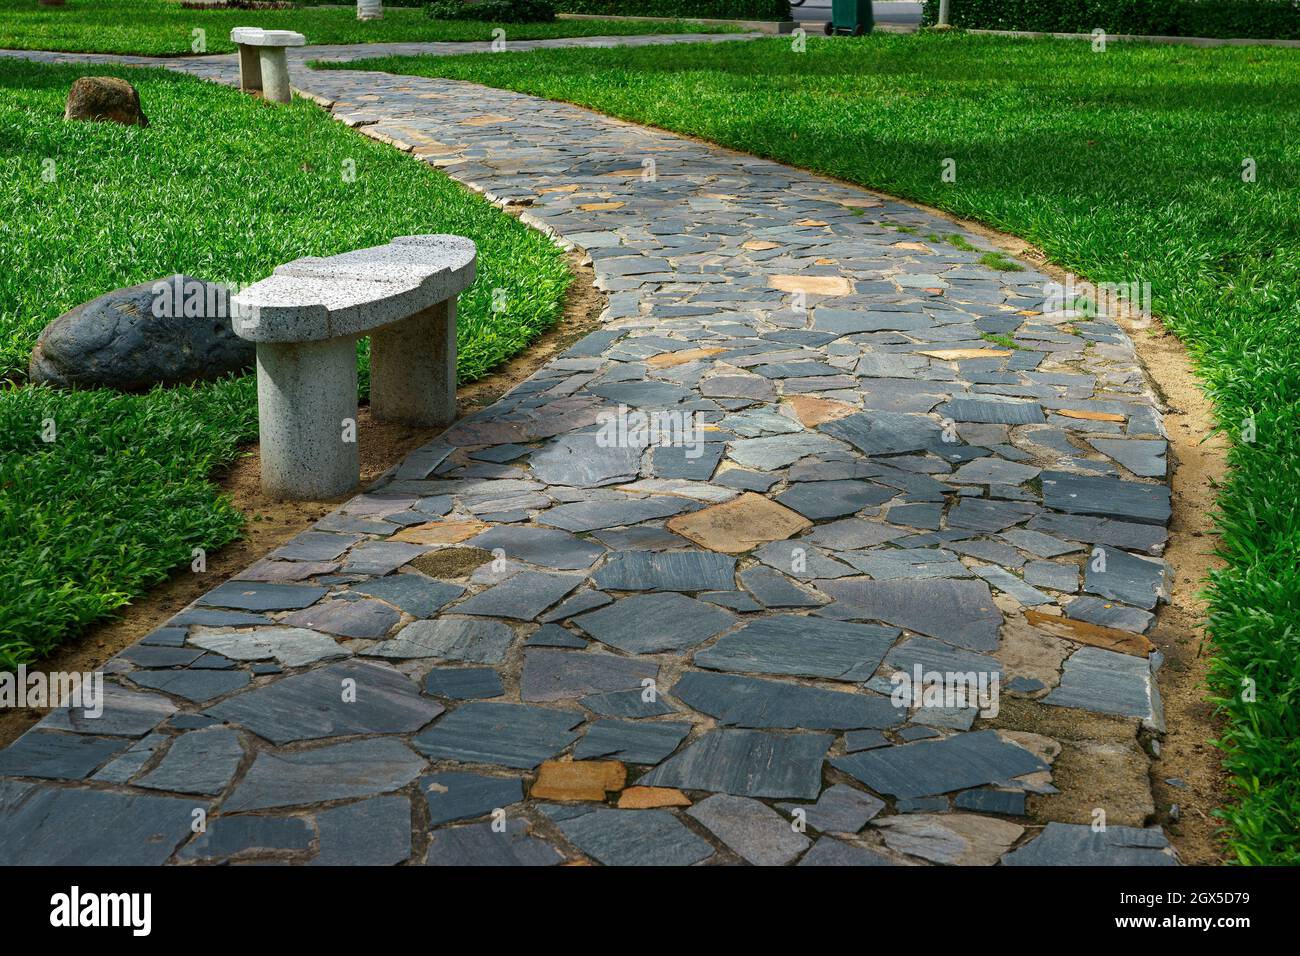 Walkway in the garden paved of stone winds among the green grass. Rest bench in the city park Stock Photo